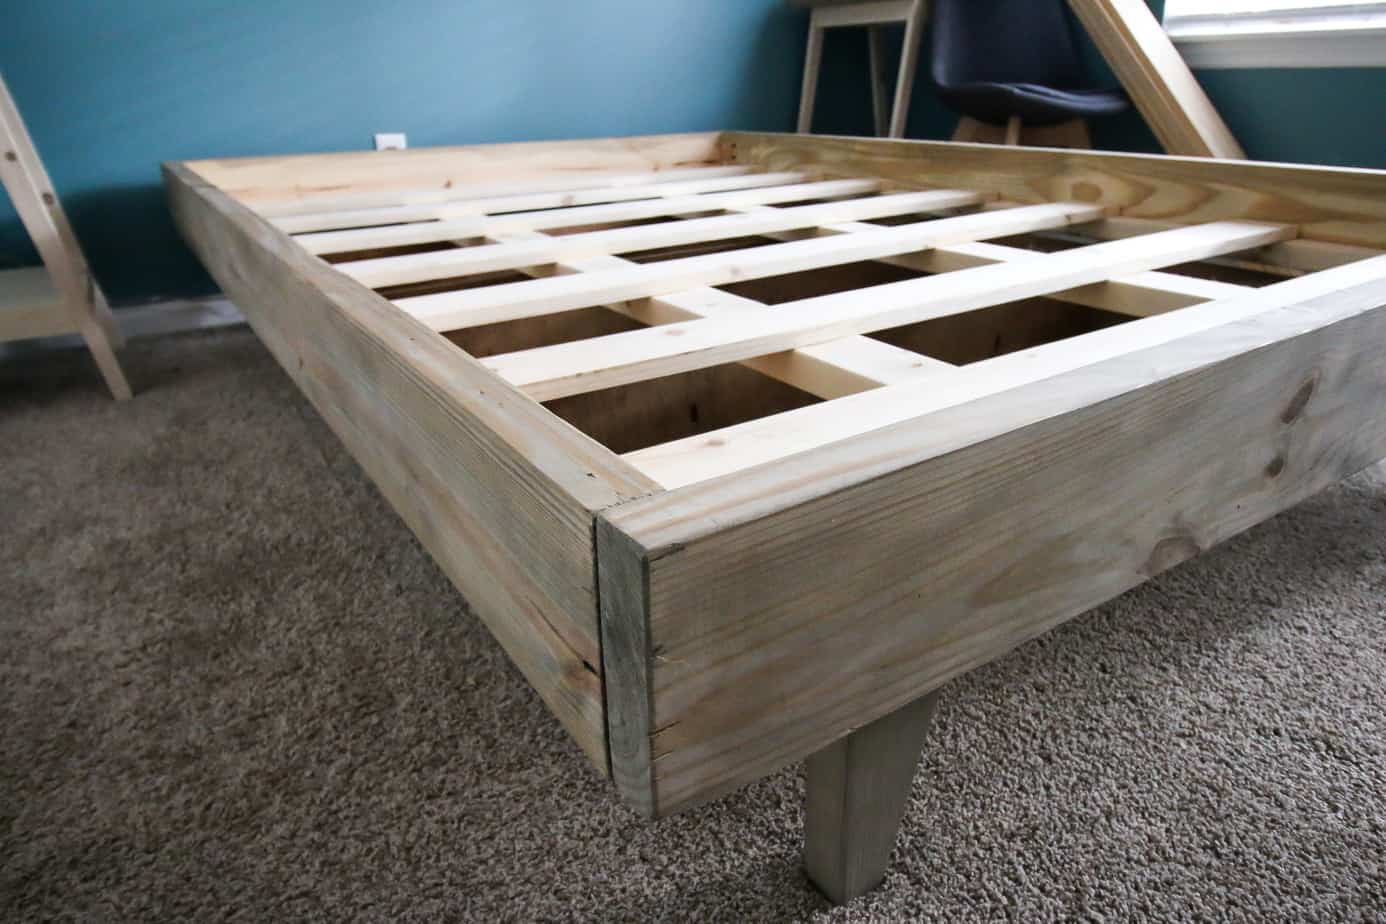 How To Build A Platform Bed For 50